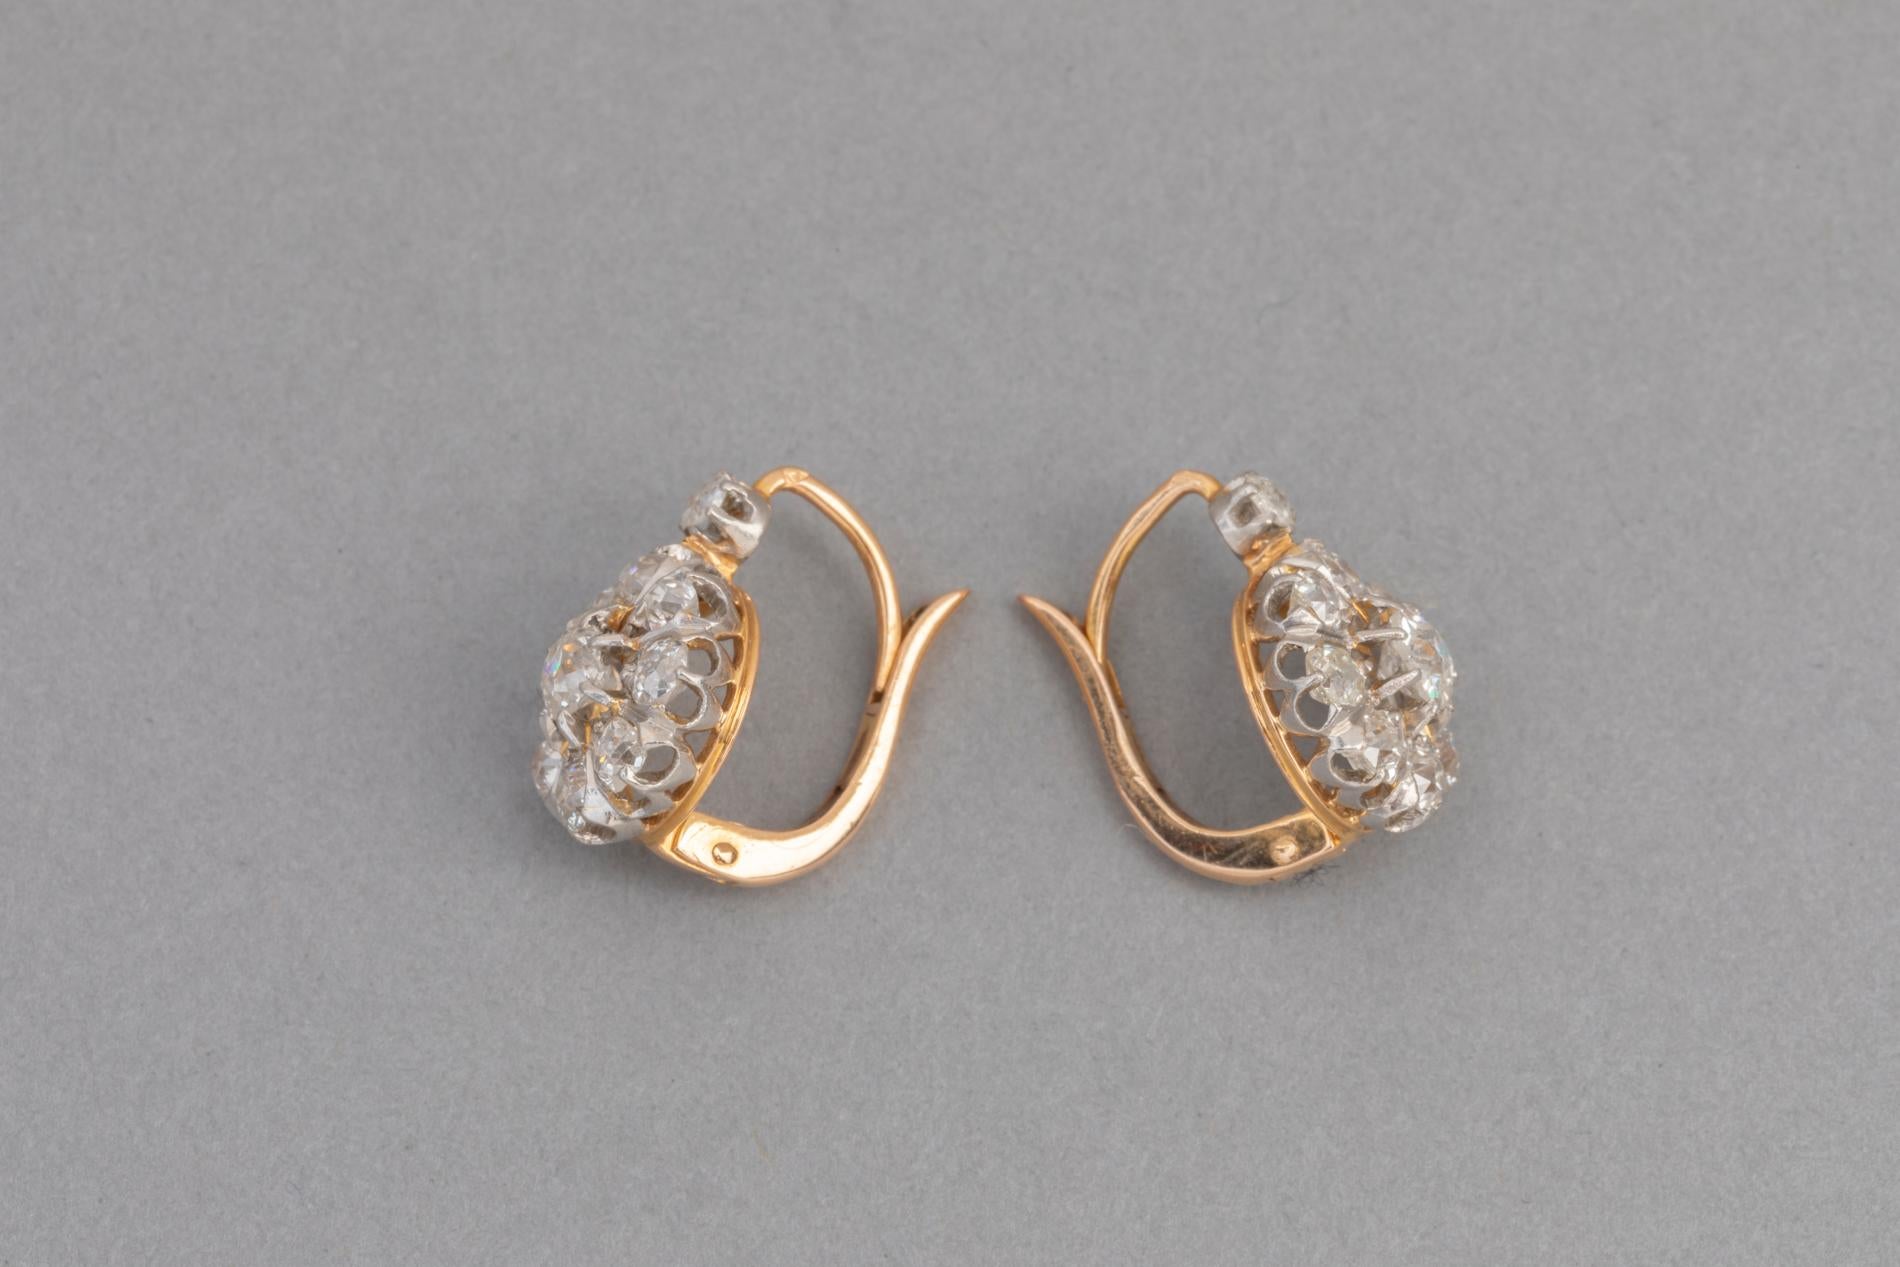 Women's 2 Carat Antique French Earrings, Gold Platinum and Diamonds